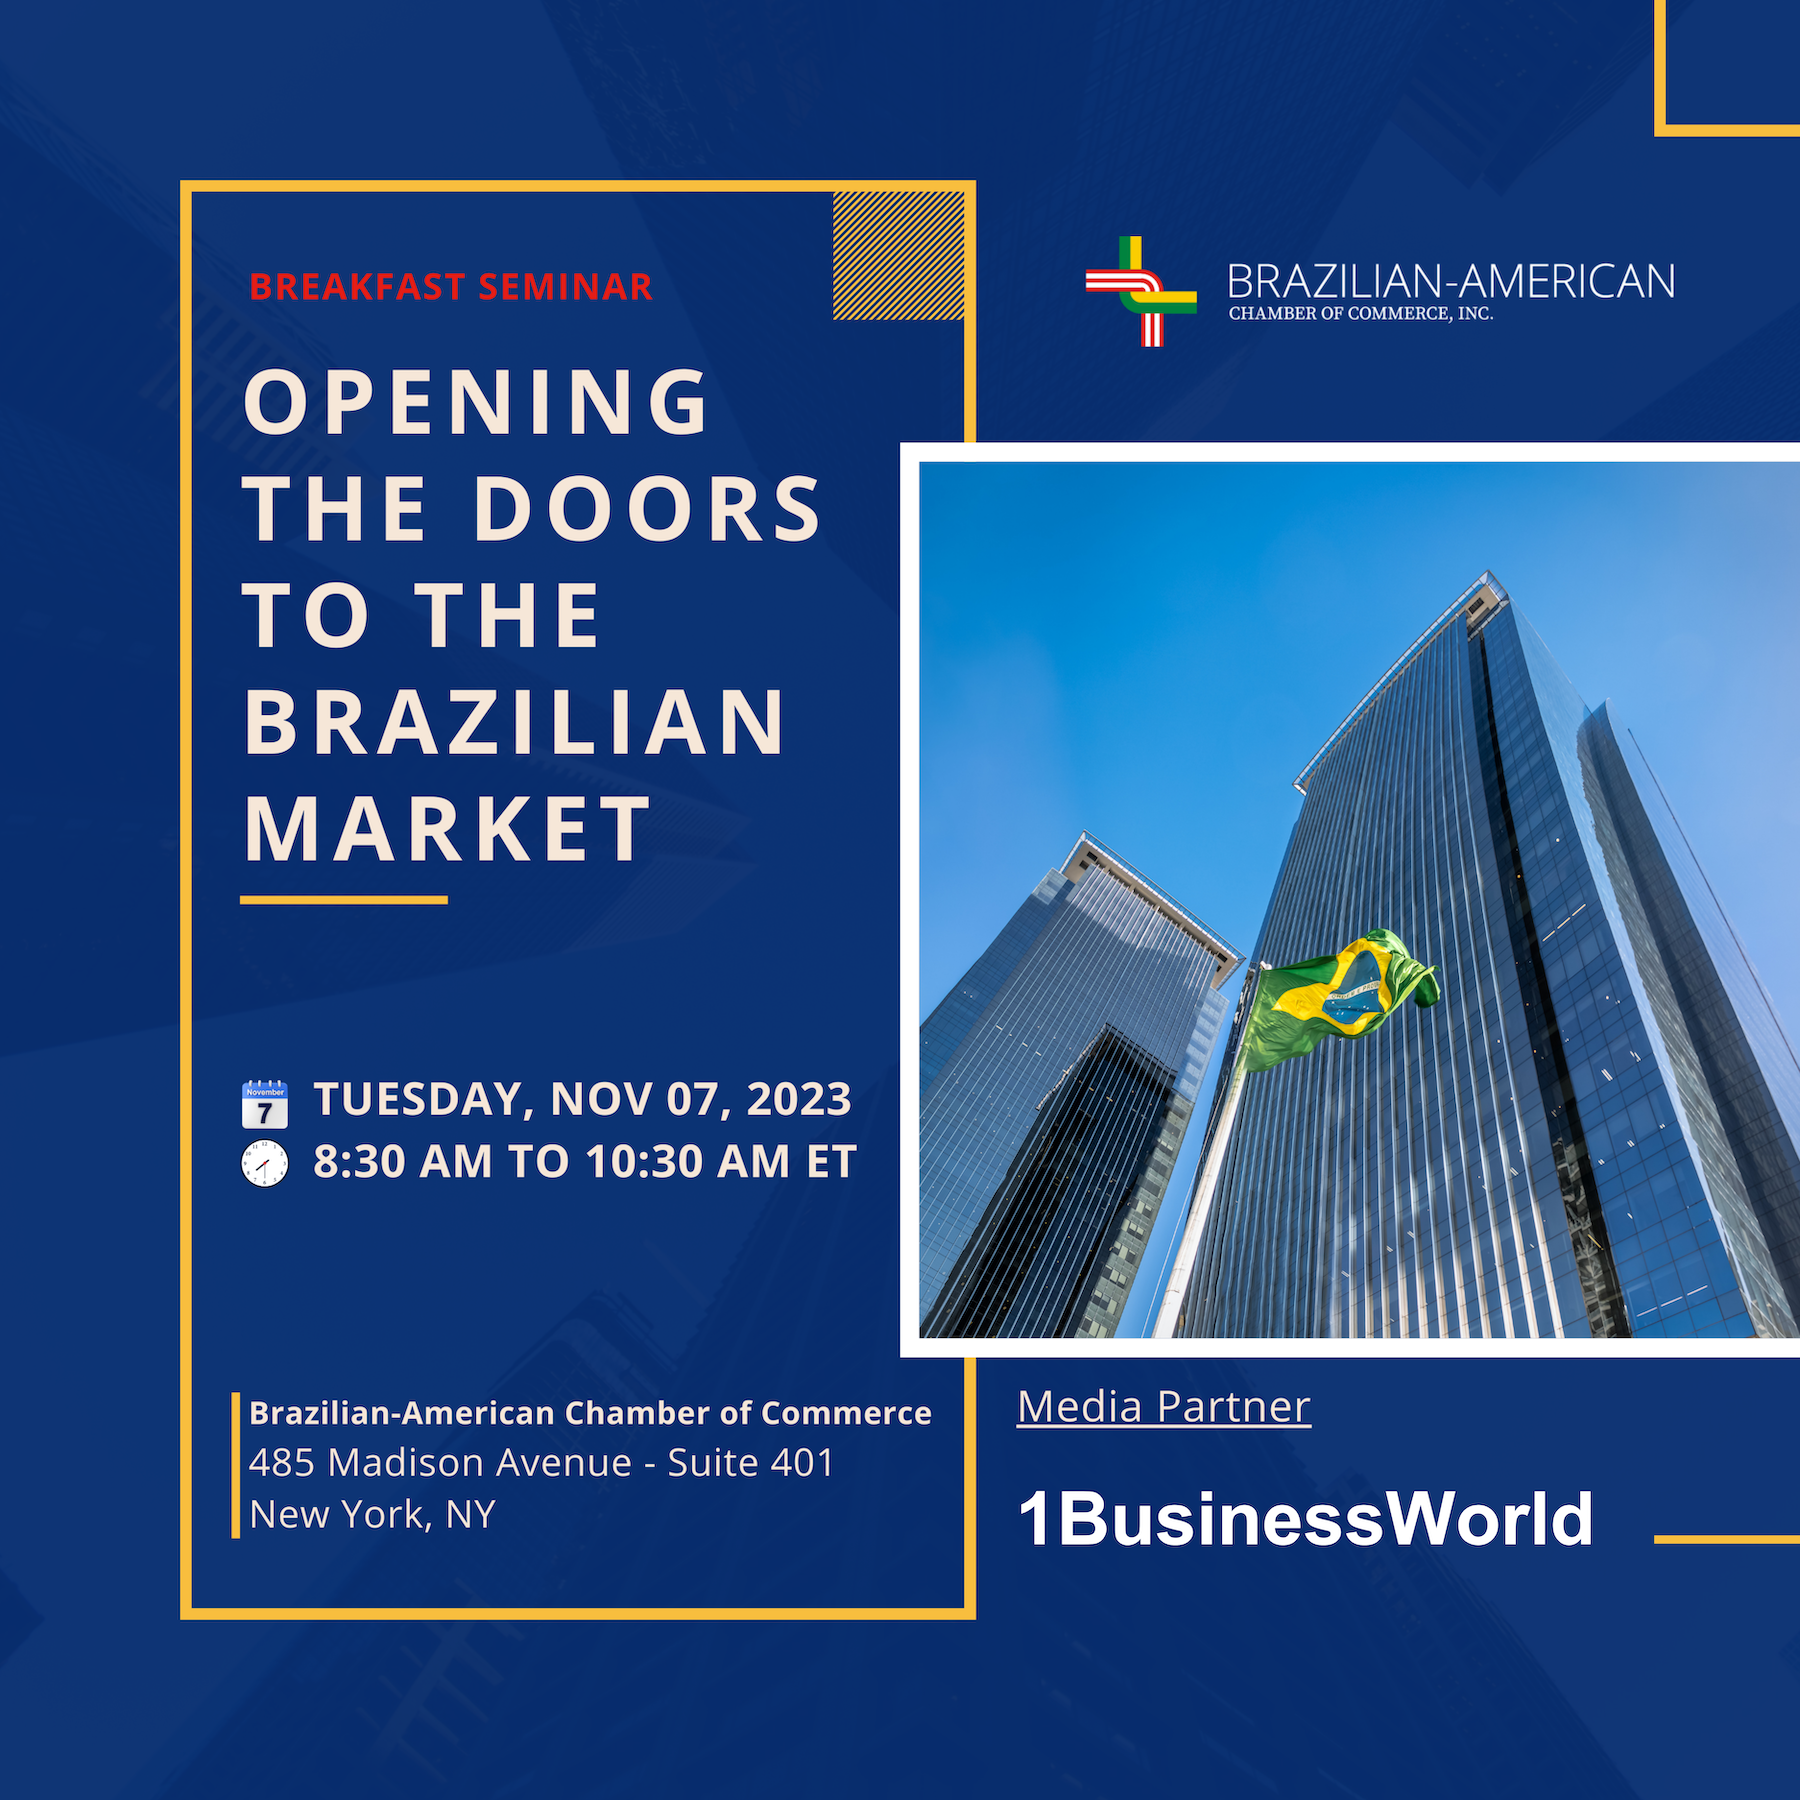 Opening the doors to the Brazilian market at the Brazilian-American Chamber of Commerce